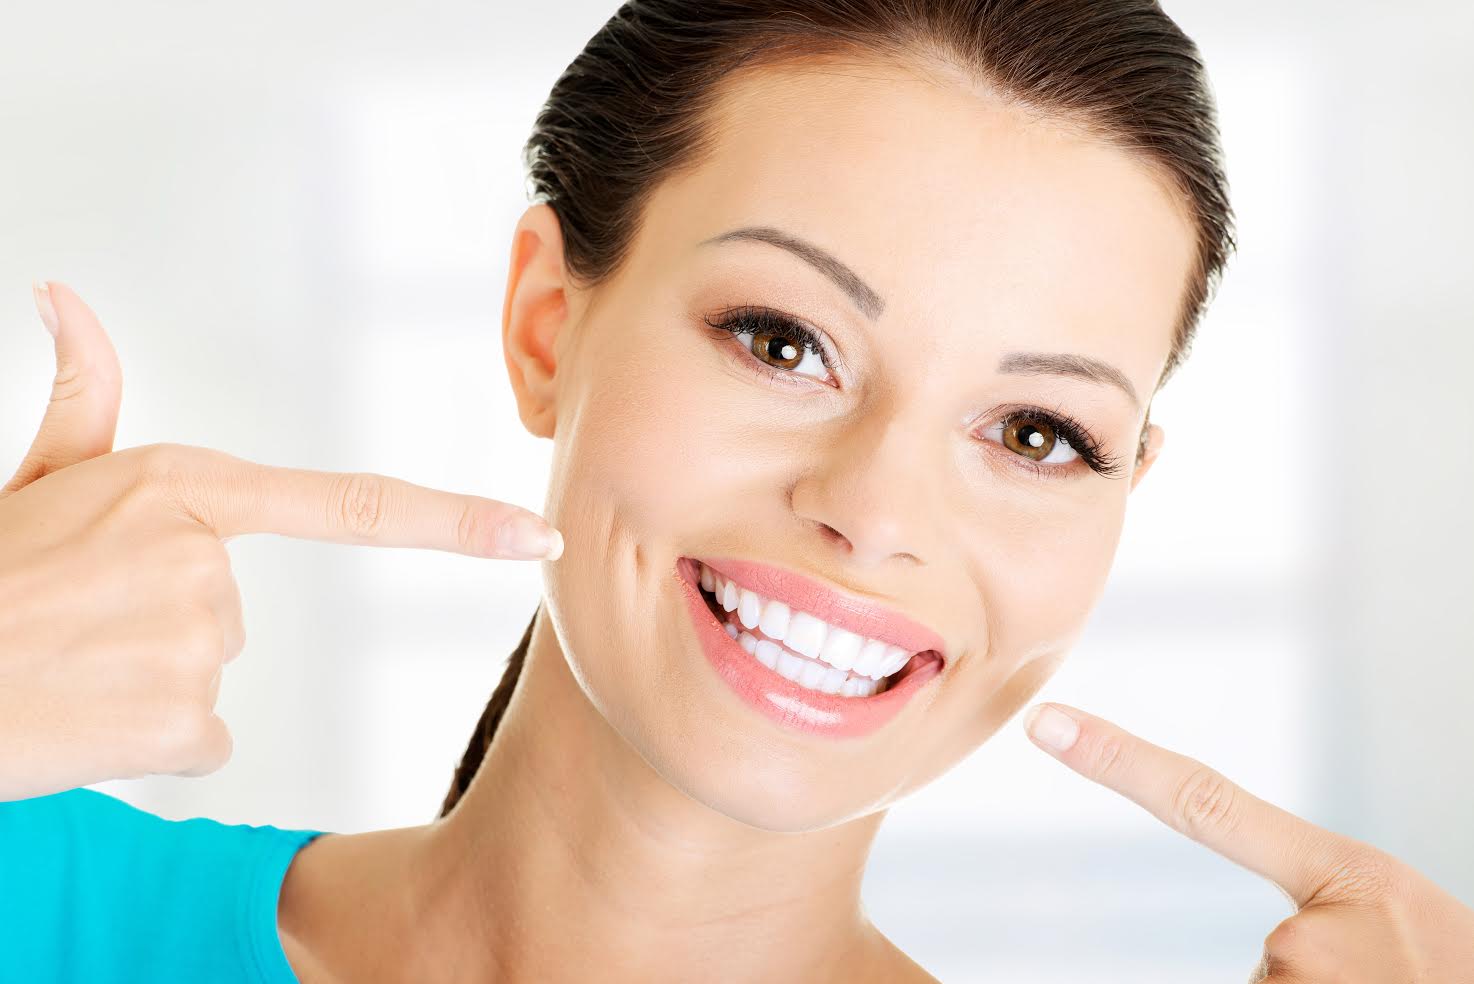 Woman smiling after her teeth whitening procedure